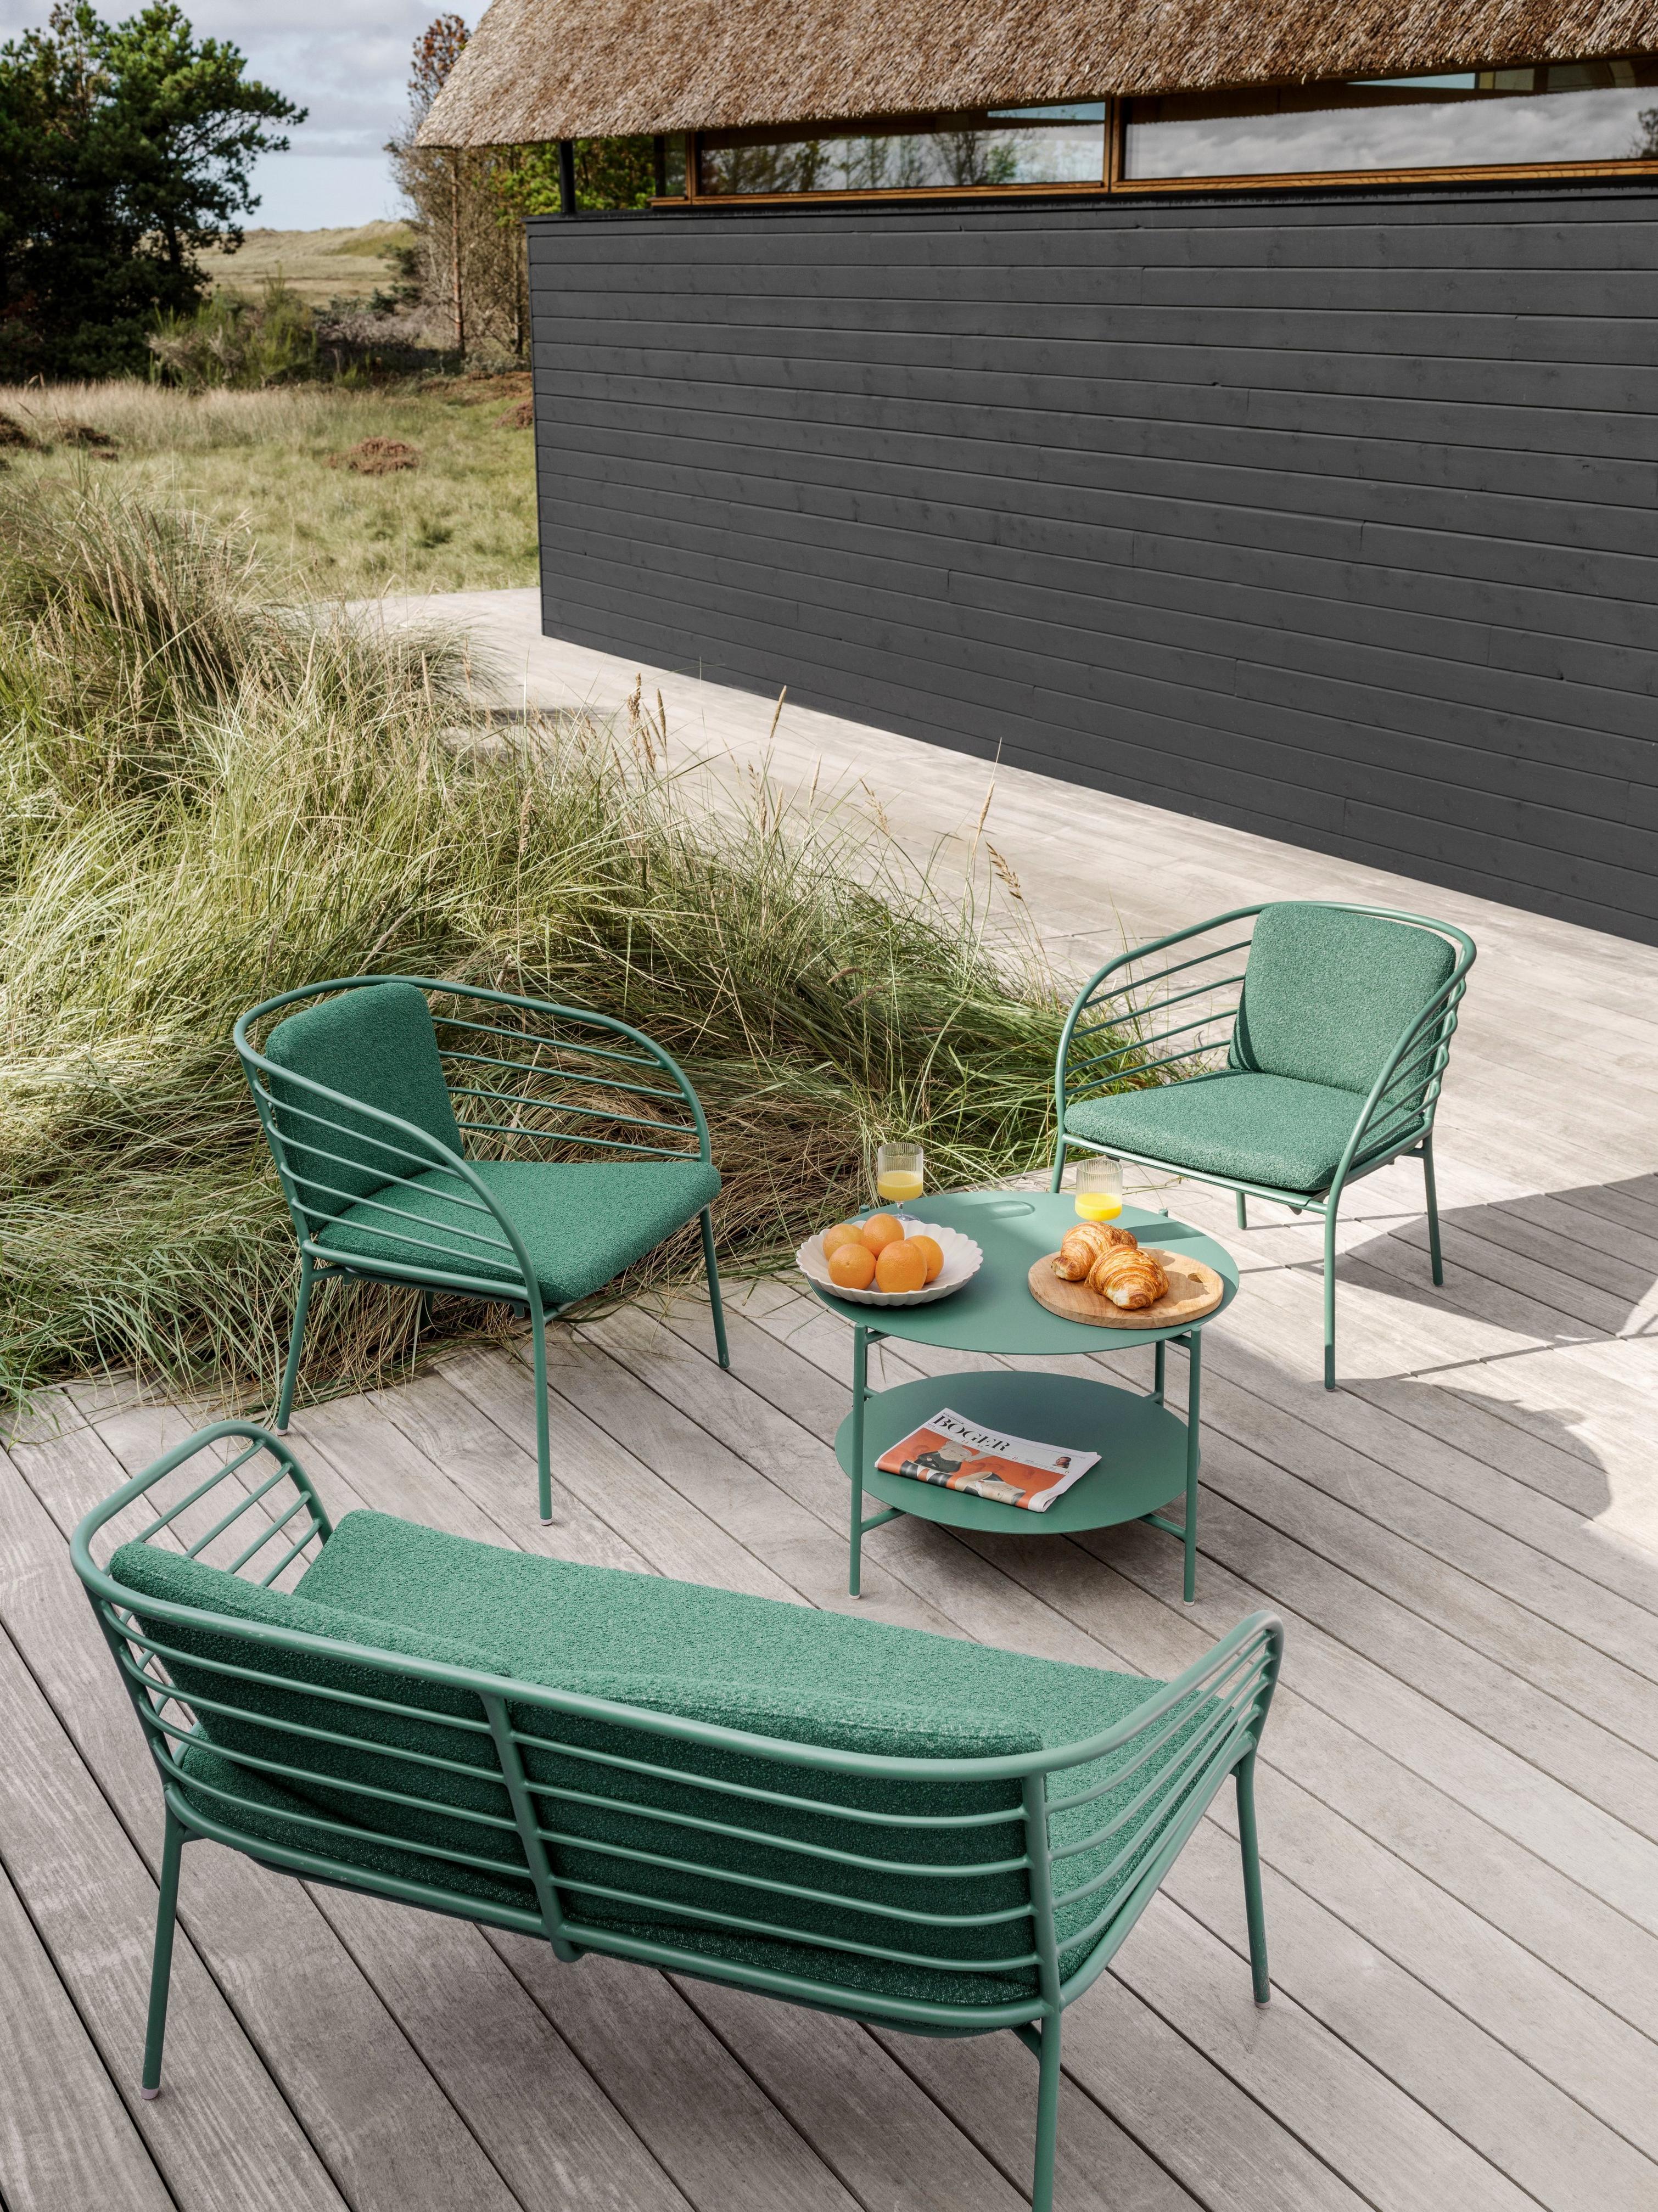 Outdoor furniture design ideas | ボーコンセプト